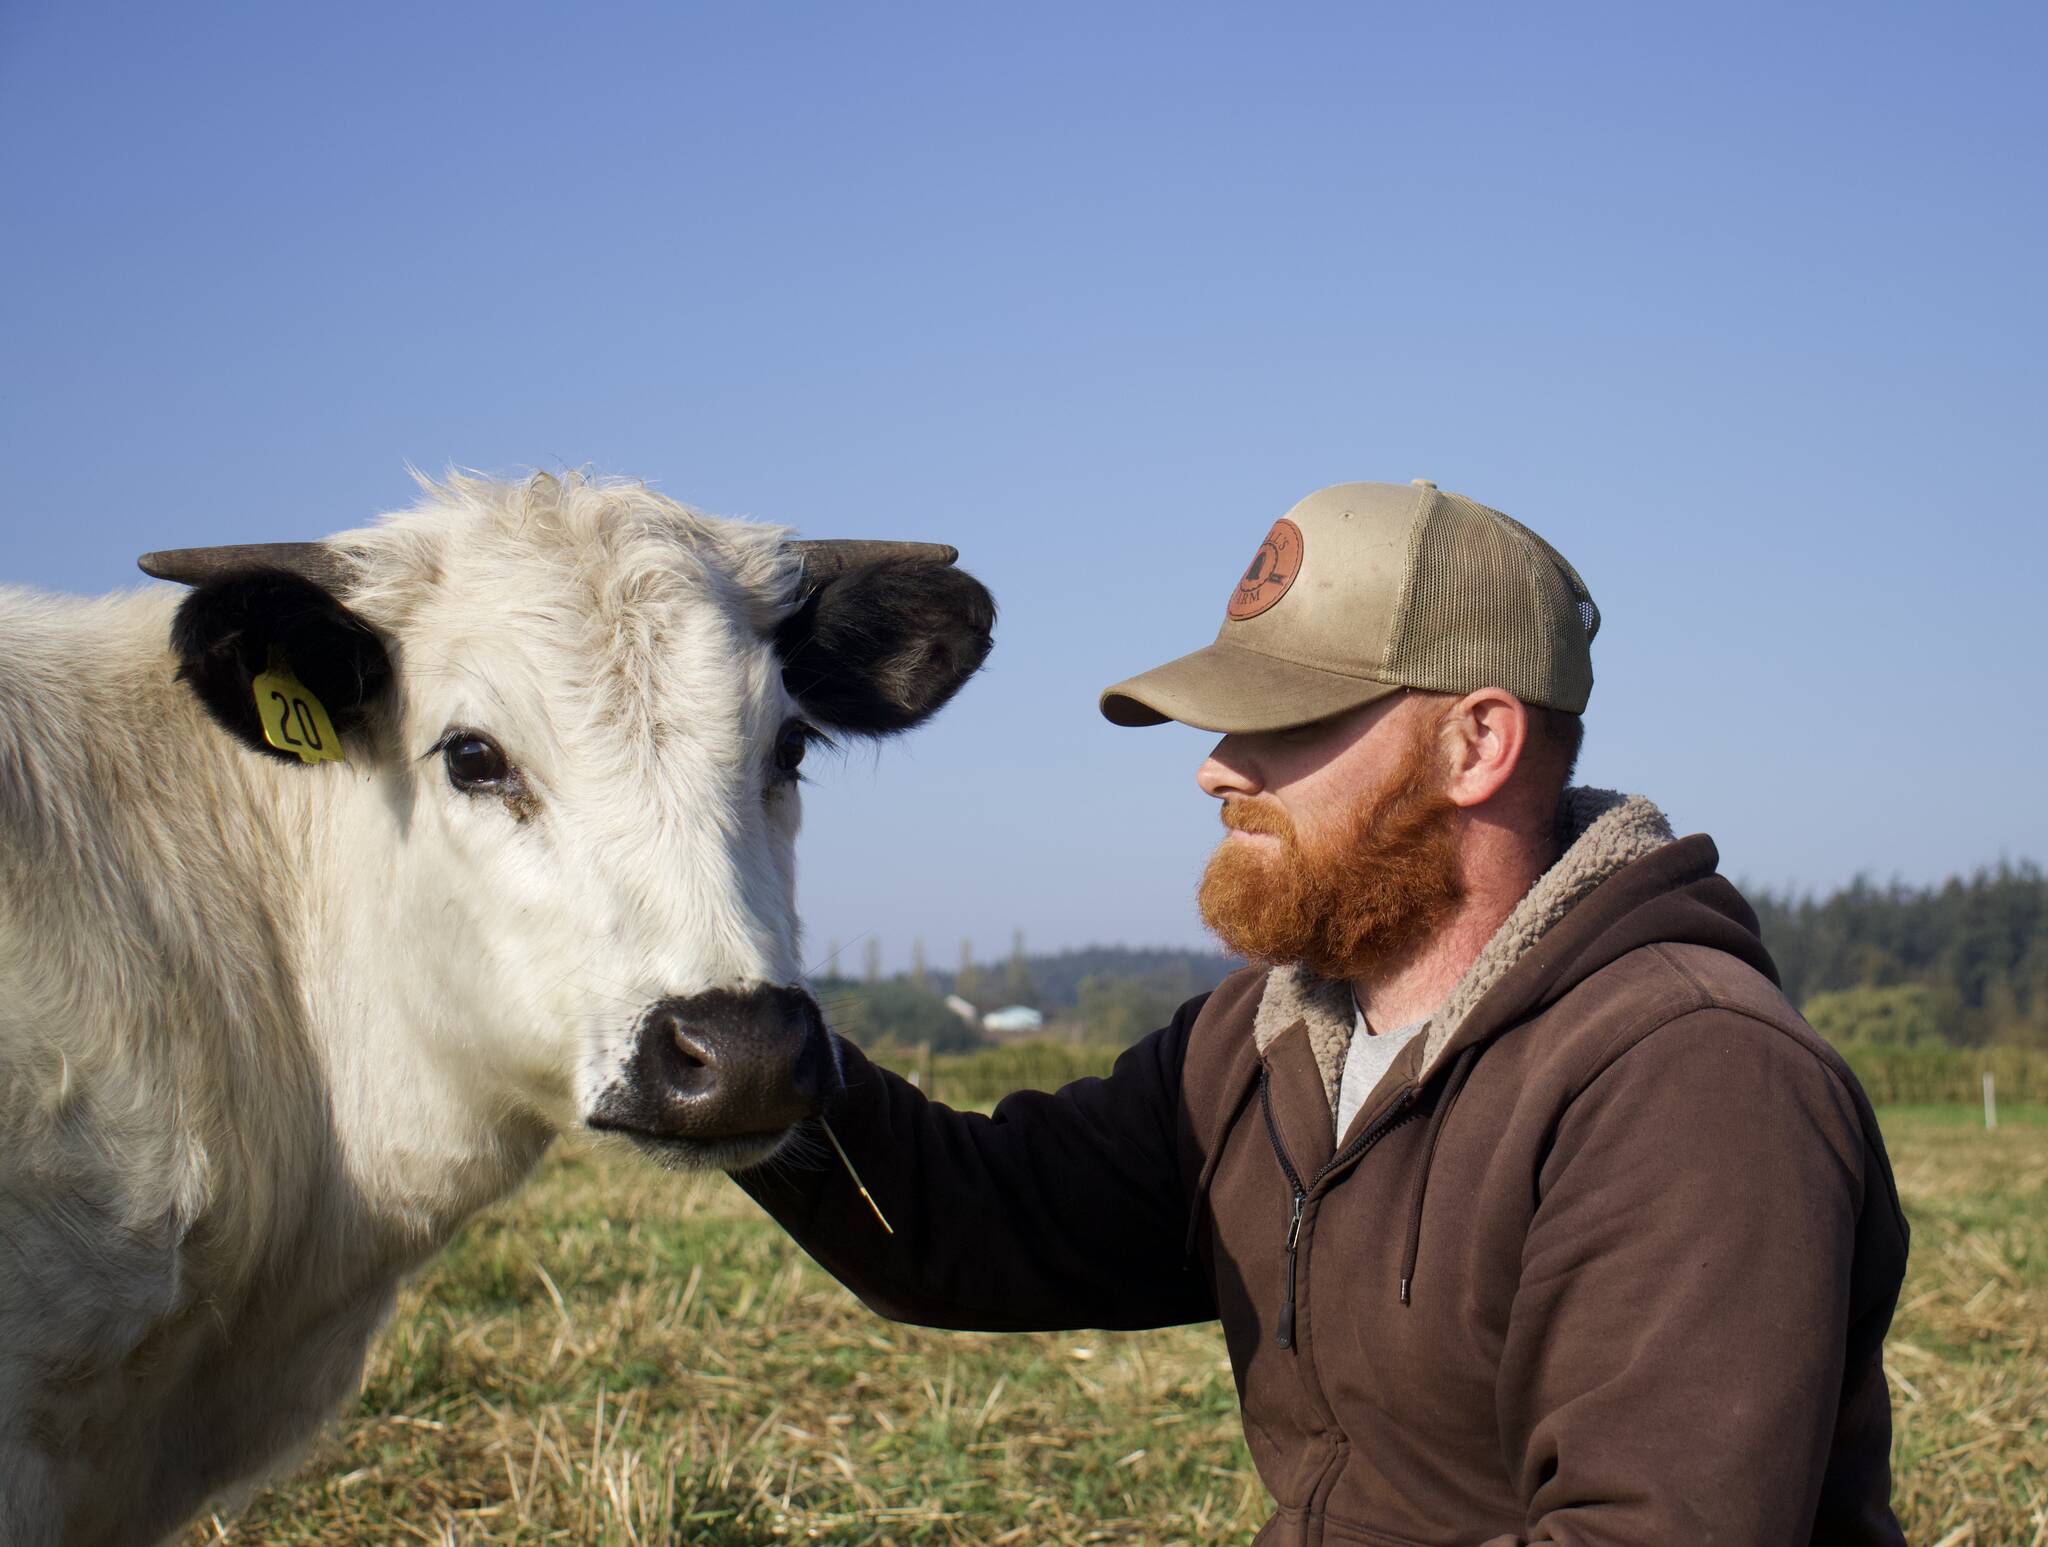 Photo by Rachel Rosen/Whidbey News-Times
Moo is a steer who has become part of the family. Bell’s Farm owner Kyle Flack said he is the “ambassador animal” for the farm.